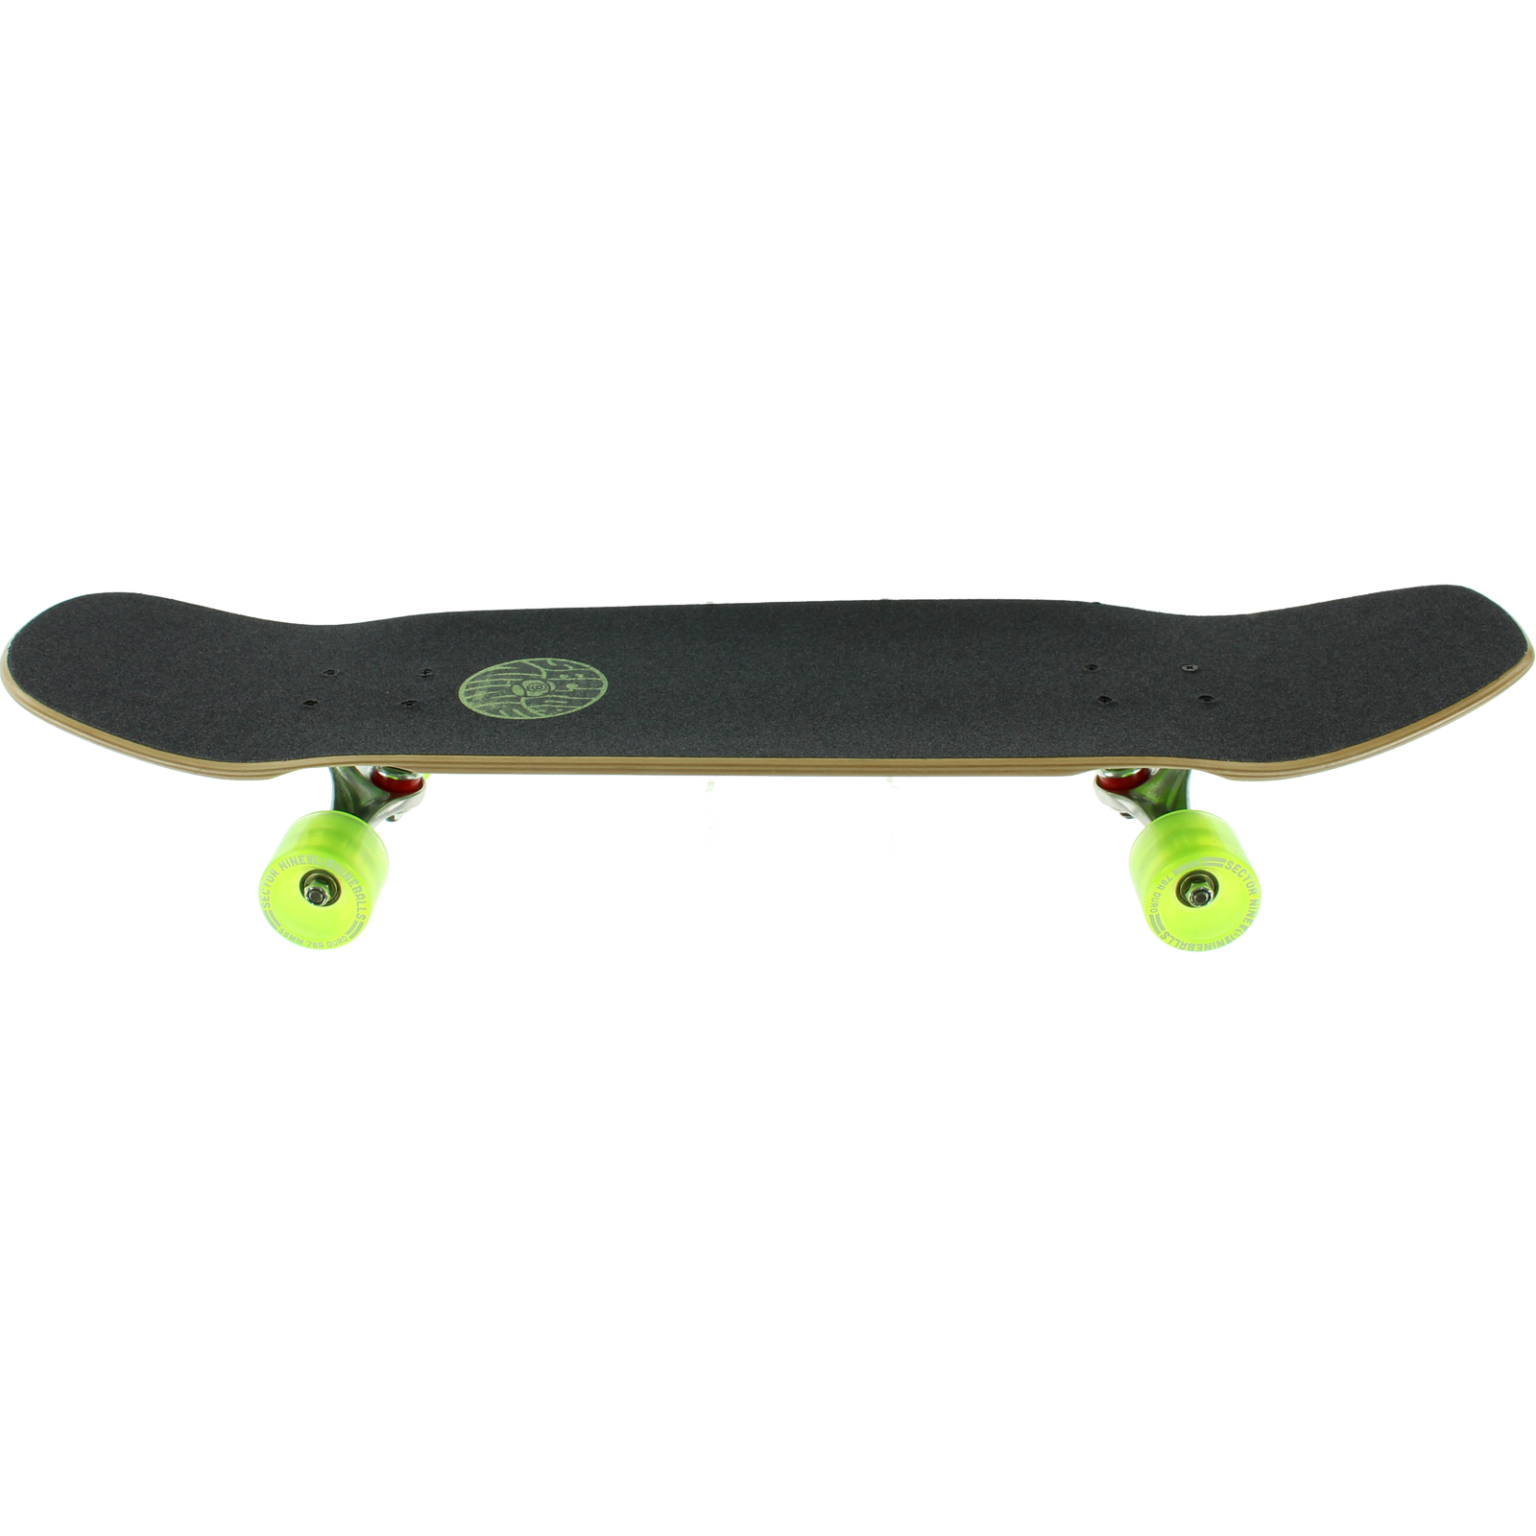 skateboard png images free download HD - NSB PICTURES